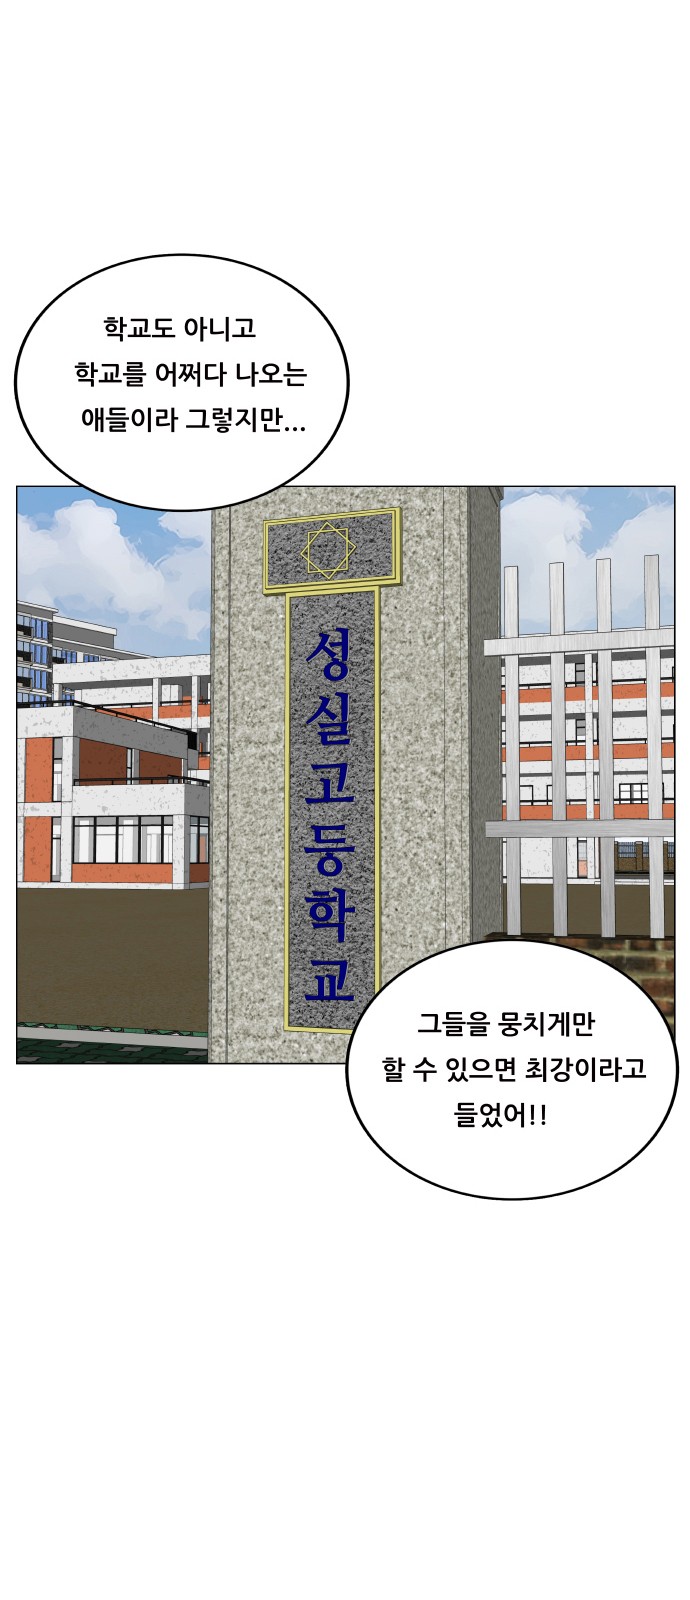 Ultimate Legend - Kang Hae Hyo - Chapter 438 - Page 3